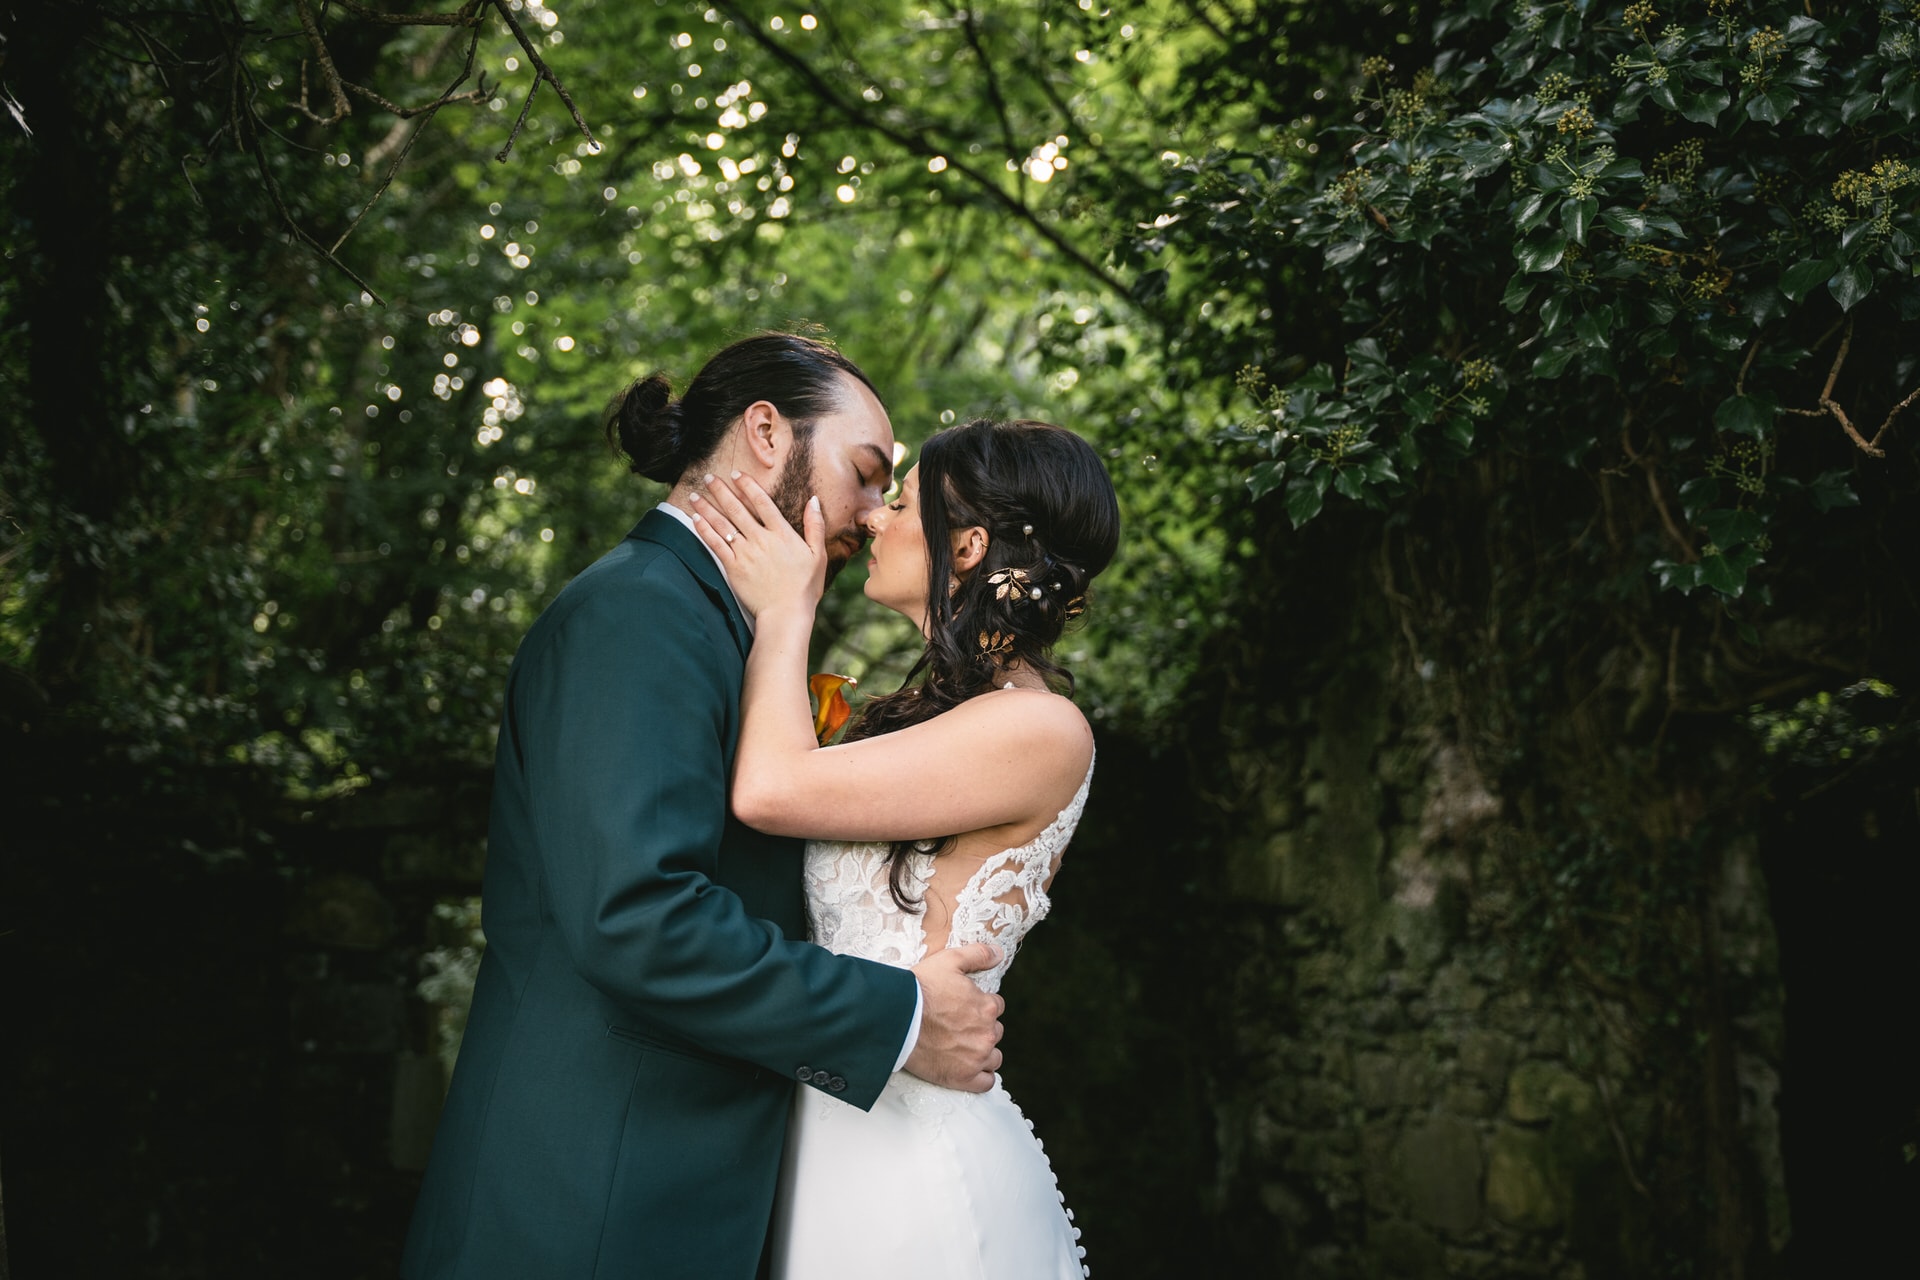 Jesse and Sal's Irish elopement: A day of adventure and love.